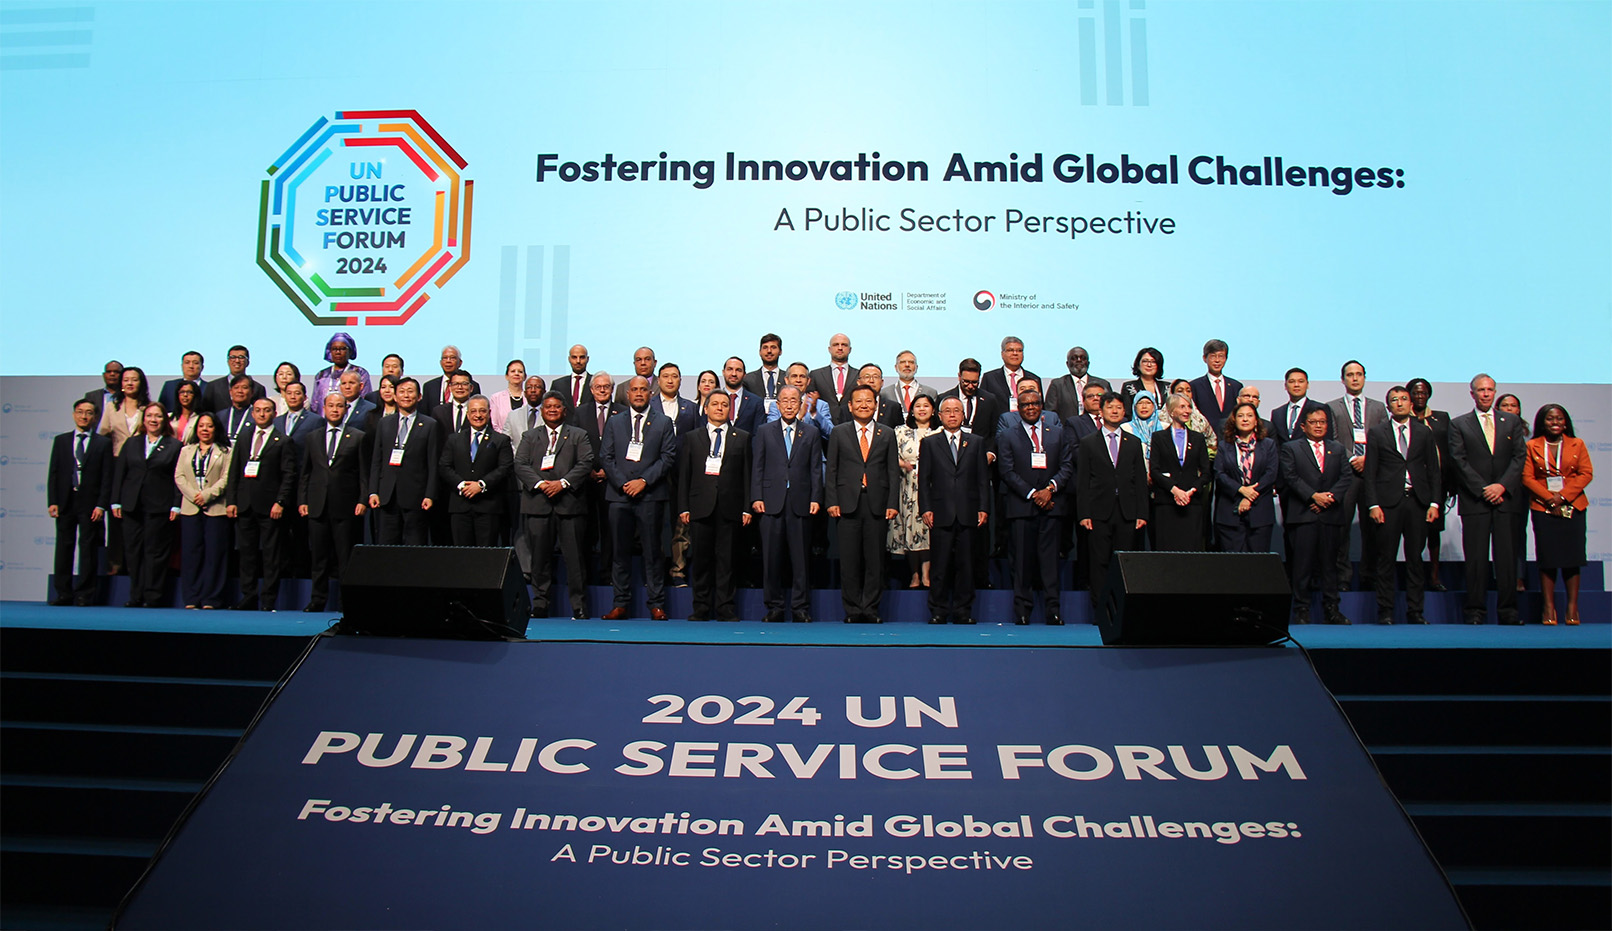 Empowering Global Public Administration: Insights from the 2024 UN Public Service Forum in Incheon